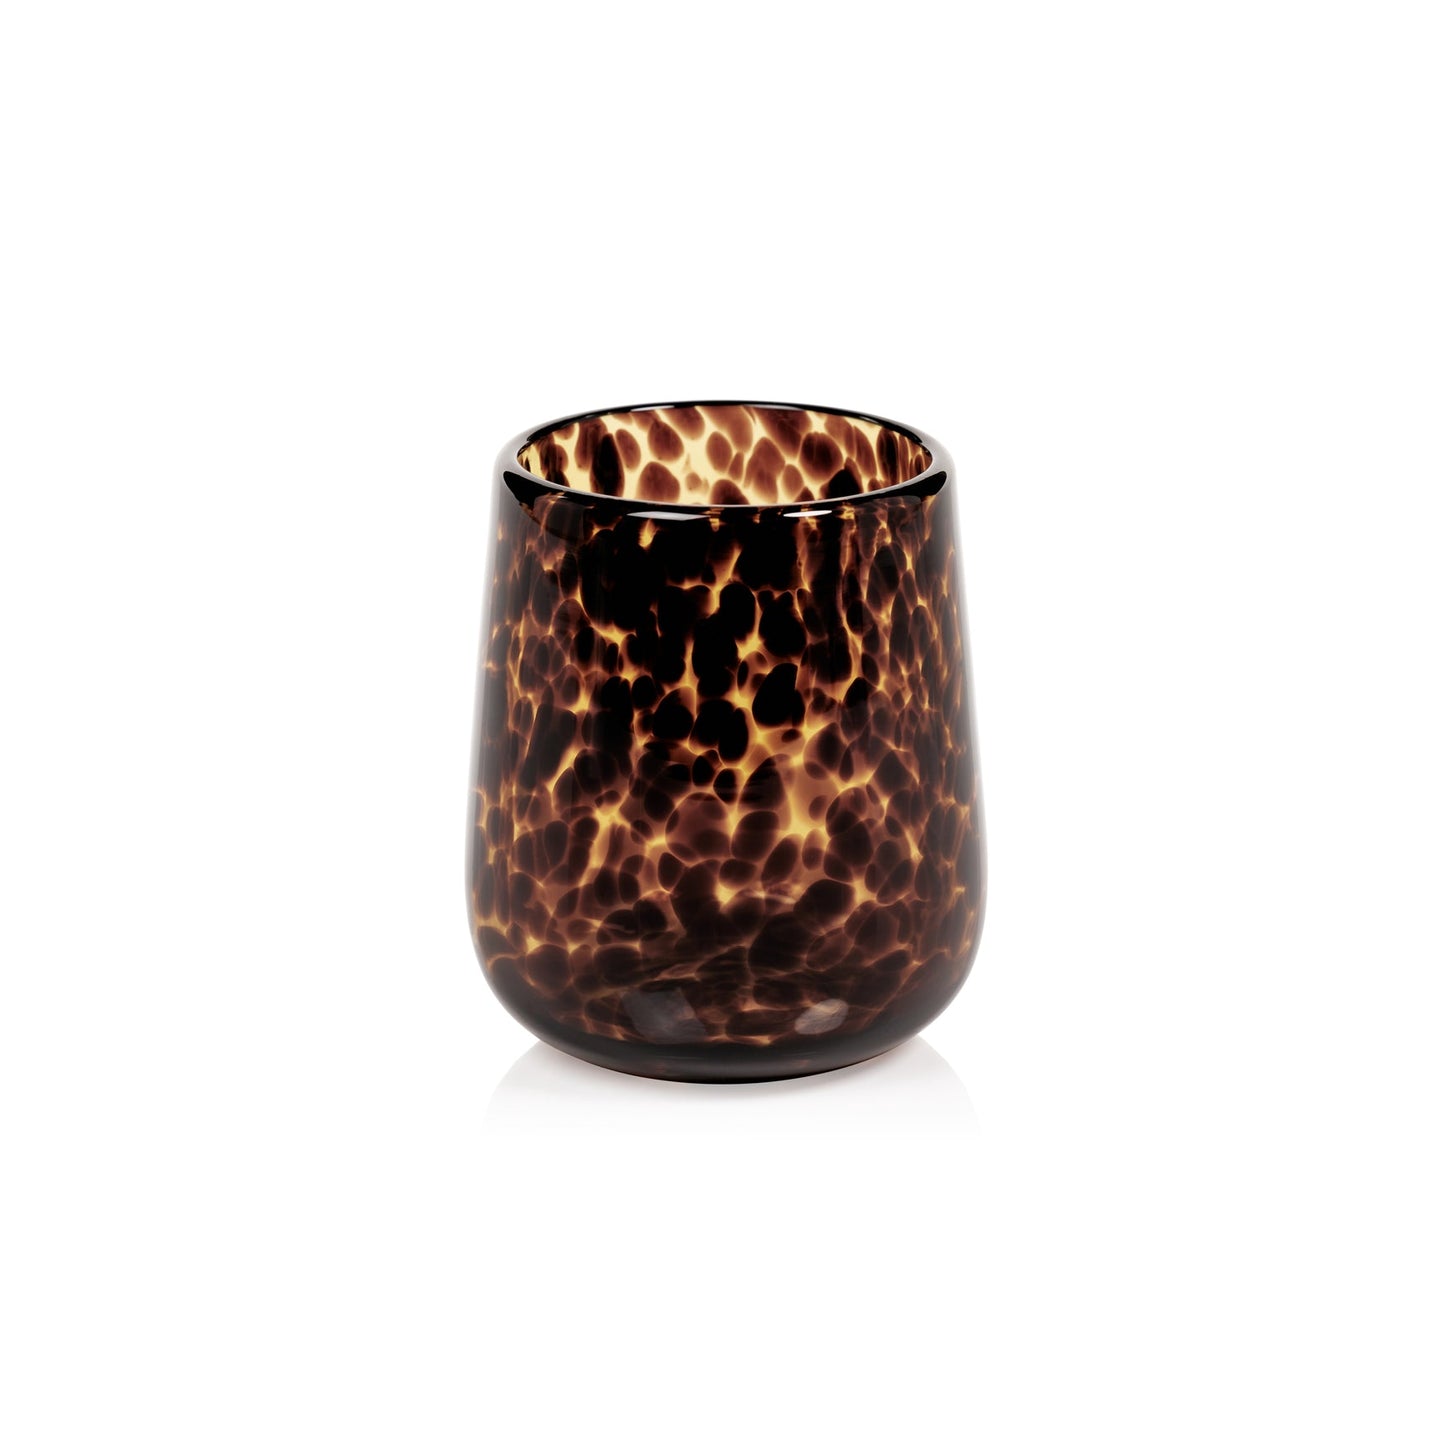 Stemless Tortoise All Purpose Glass - Amber & Black/Amber & Black Spiral sold in Sets of 6